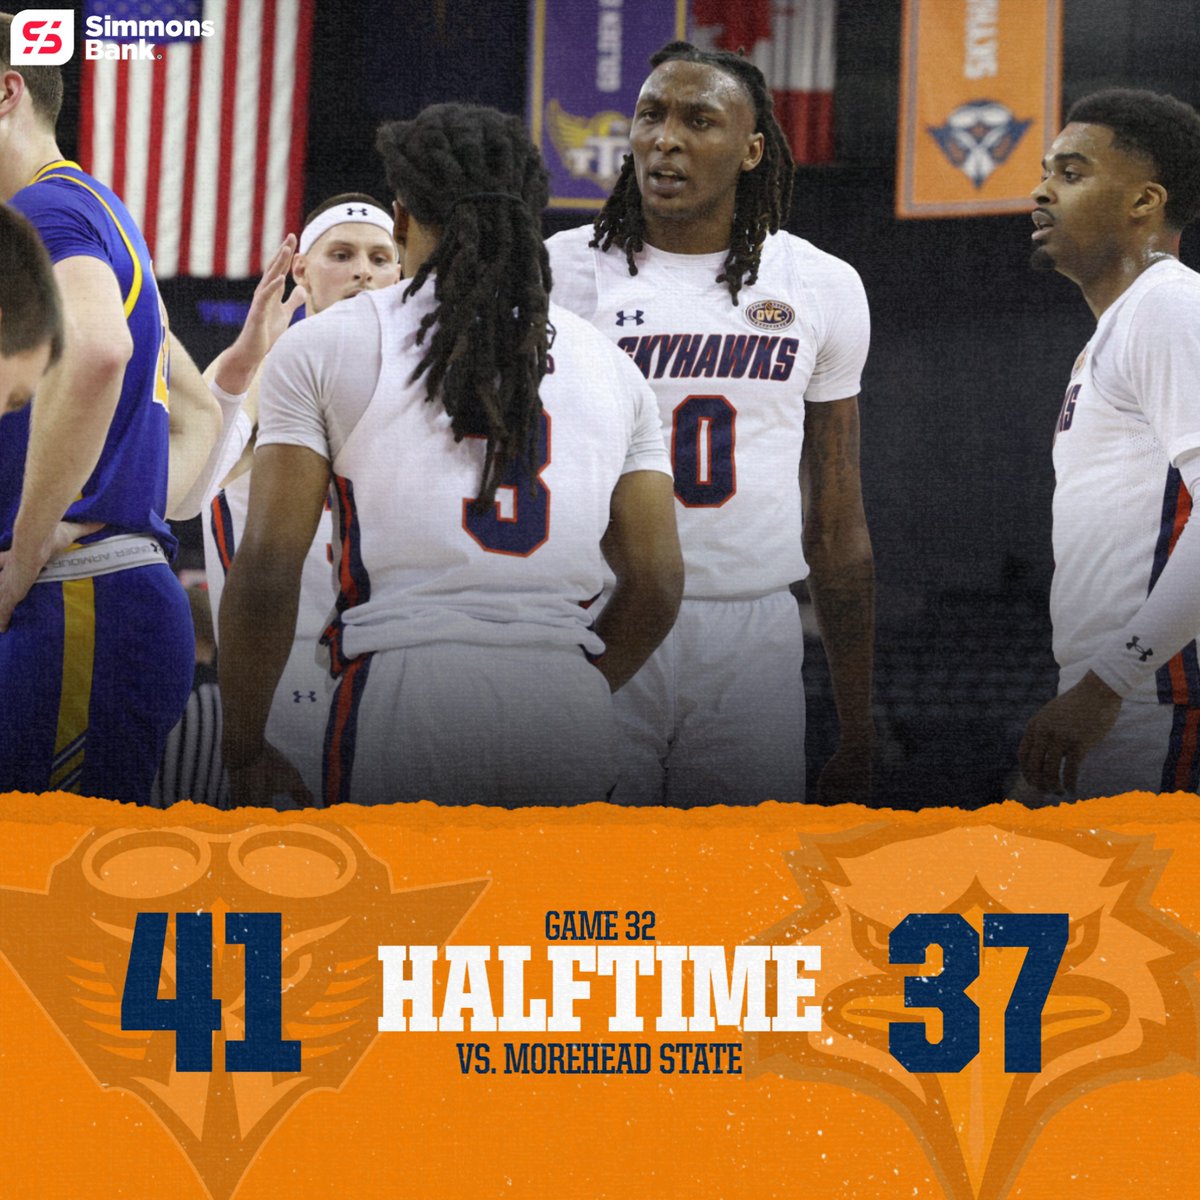 One exciting half of basketball is in the books and the Skyhawks head into halftime leading by four! 🏀 Jordan Sears | 18 points, 3 rebounds 🏀 KK Curry | 10 points, 3 steals #MartinMade | #OVCit